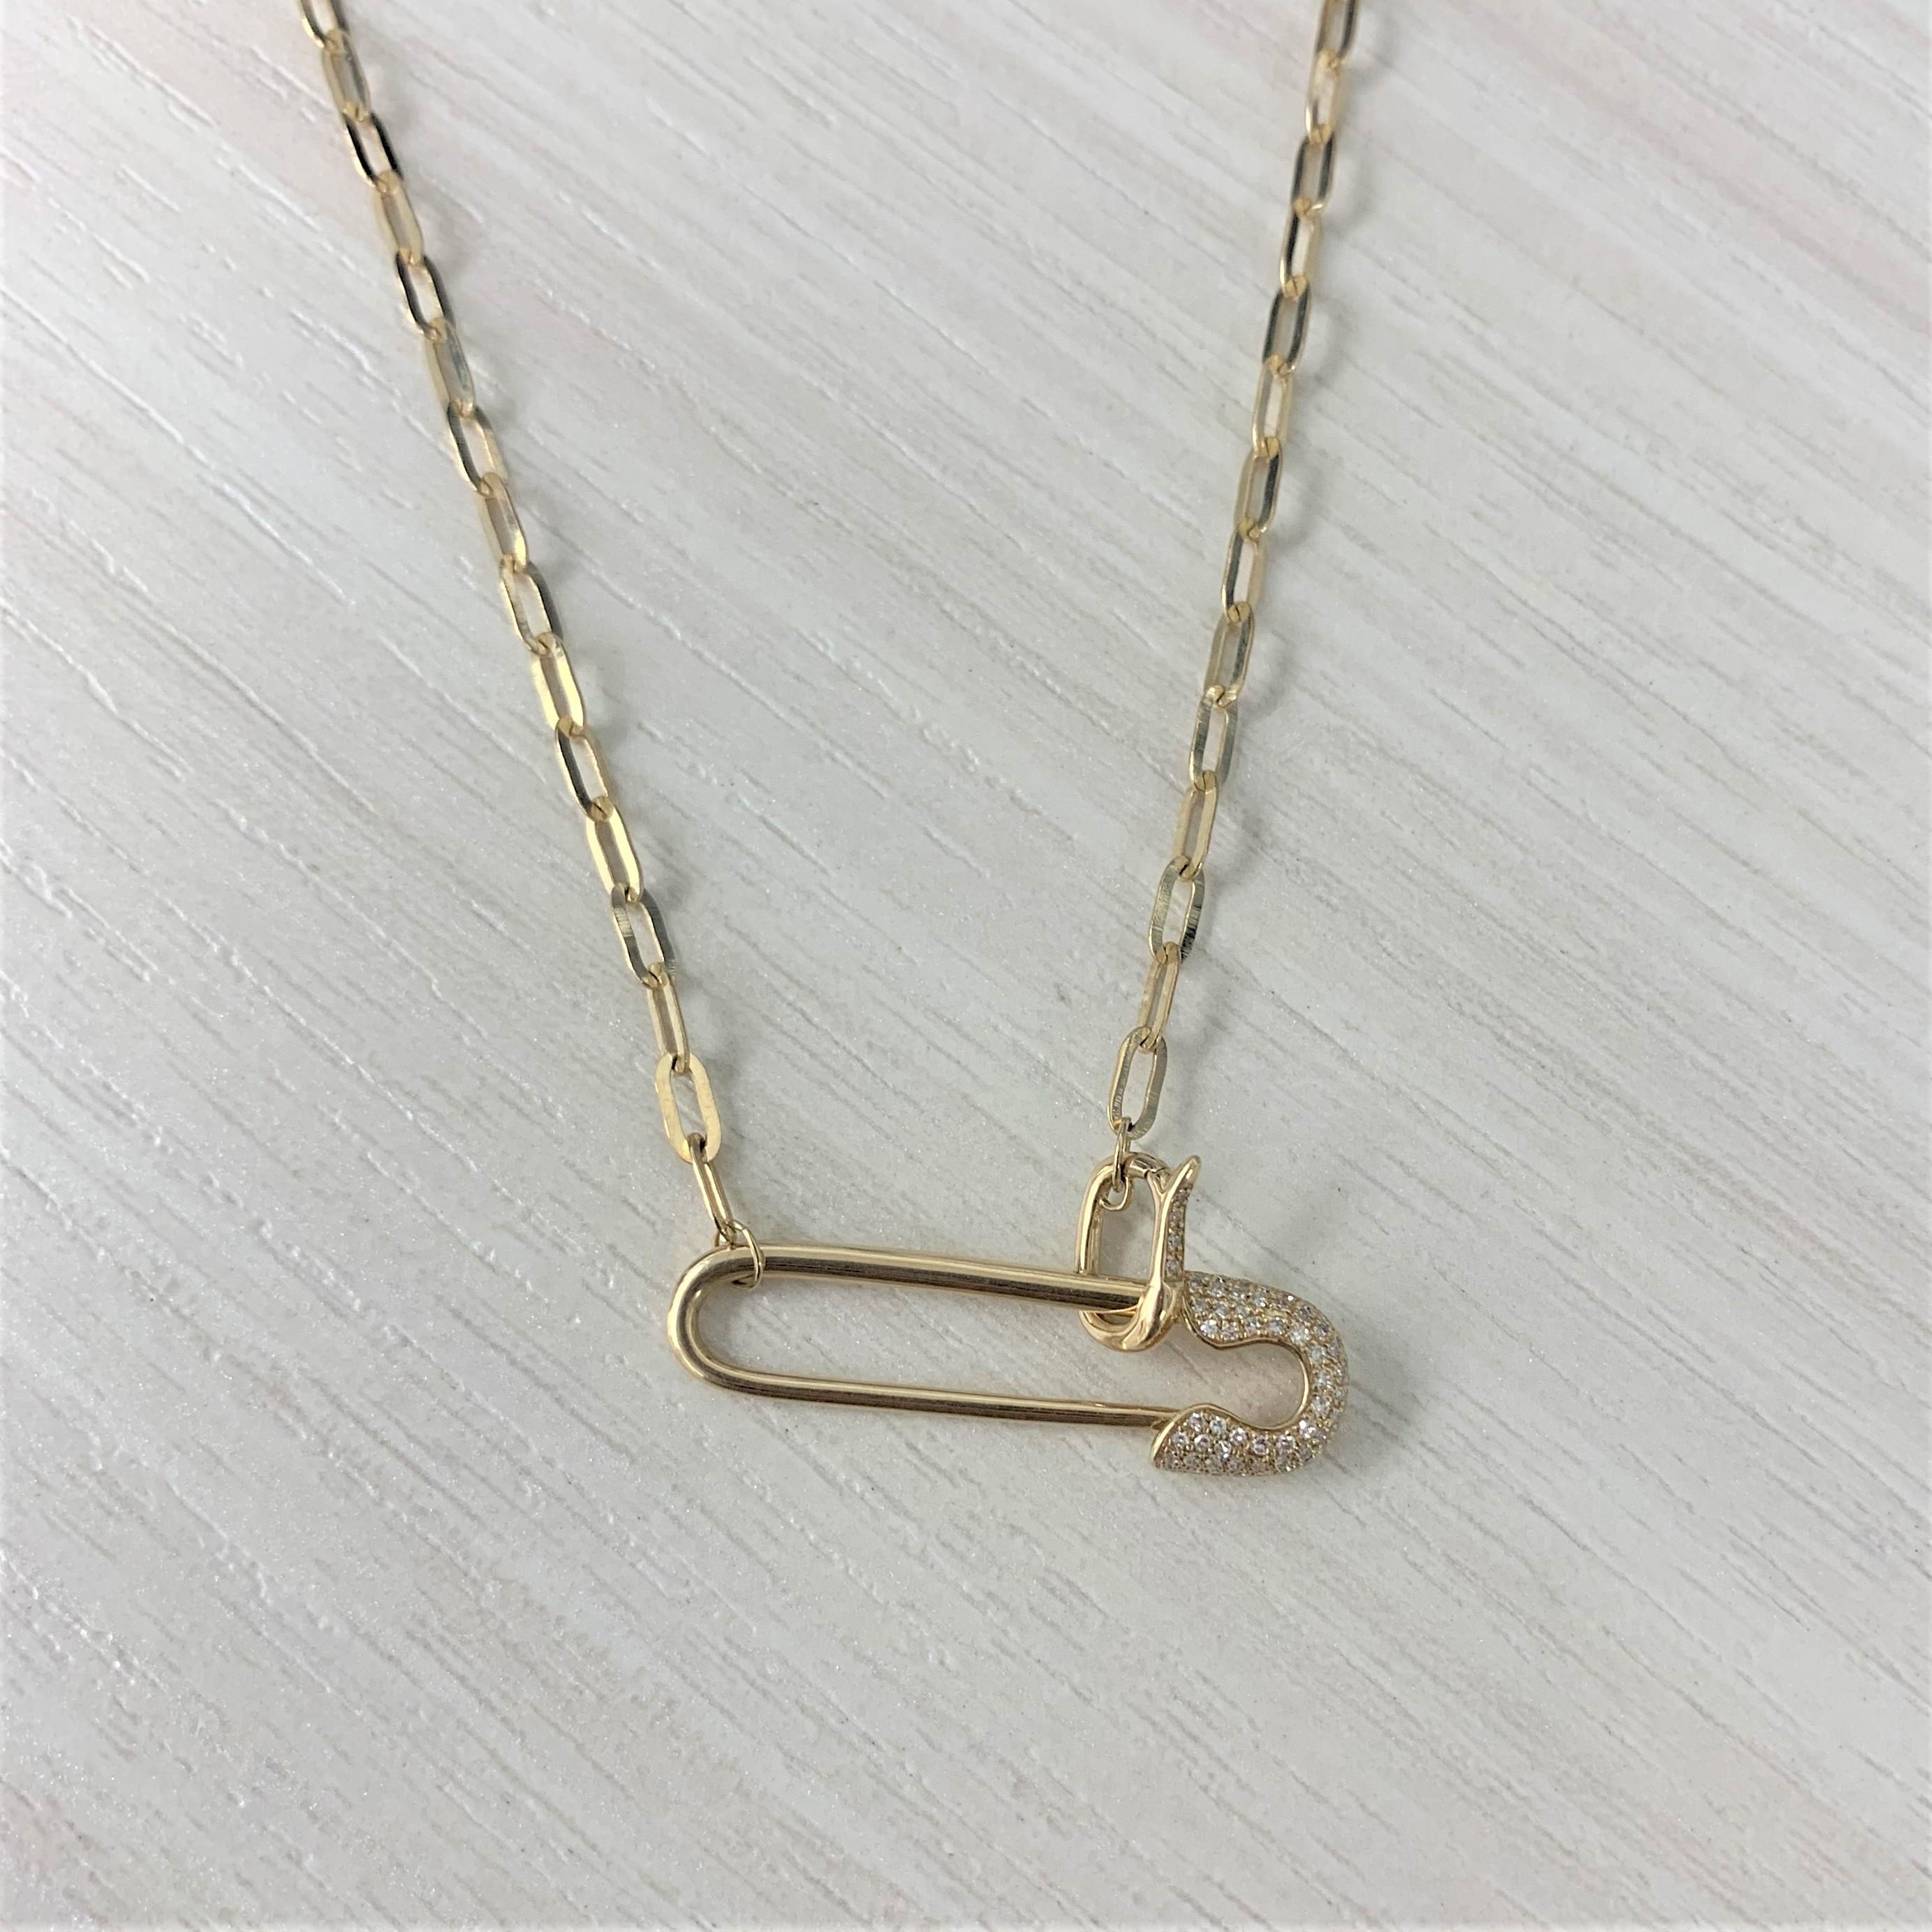 Add this Saftey Pin adorable necklace to your wardrobe to add that special glamour! Crafted of 14K Yellow Gold this neckalce features 0.12 carats of round natural white diamonds. Gold weight is 5.46 grams. Chain length is 18